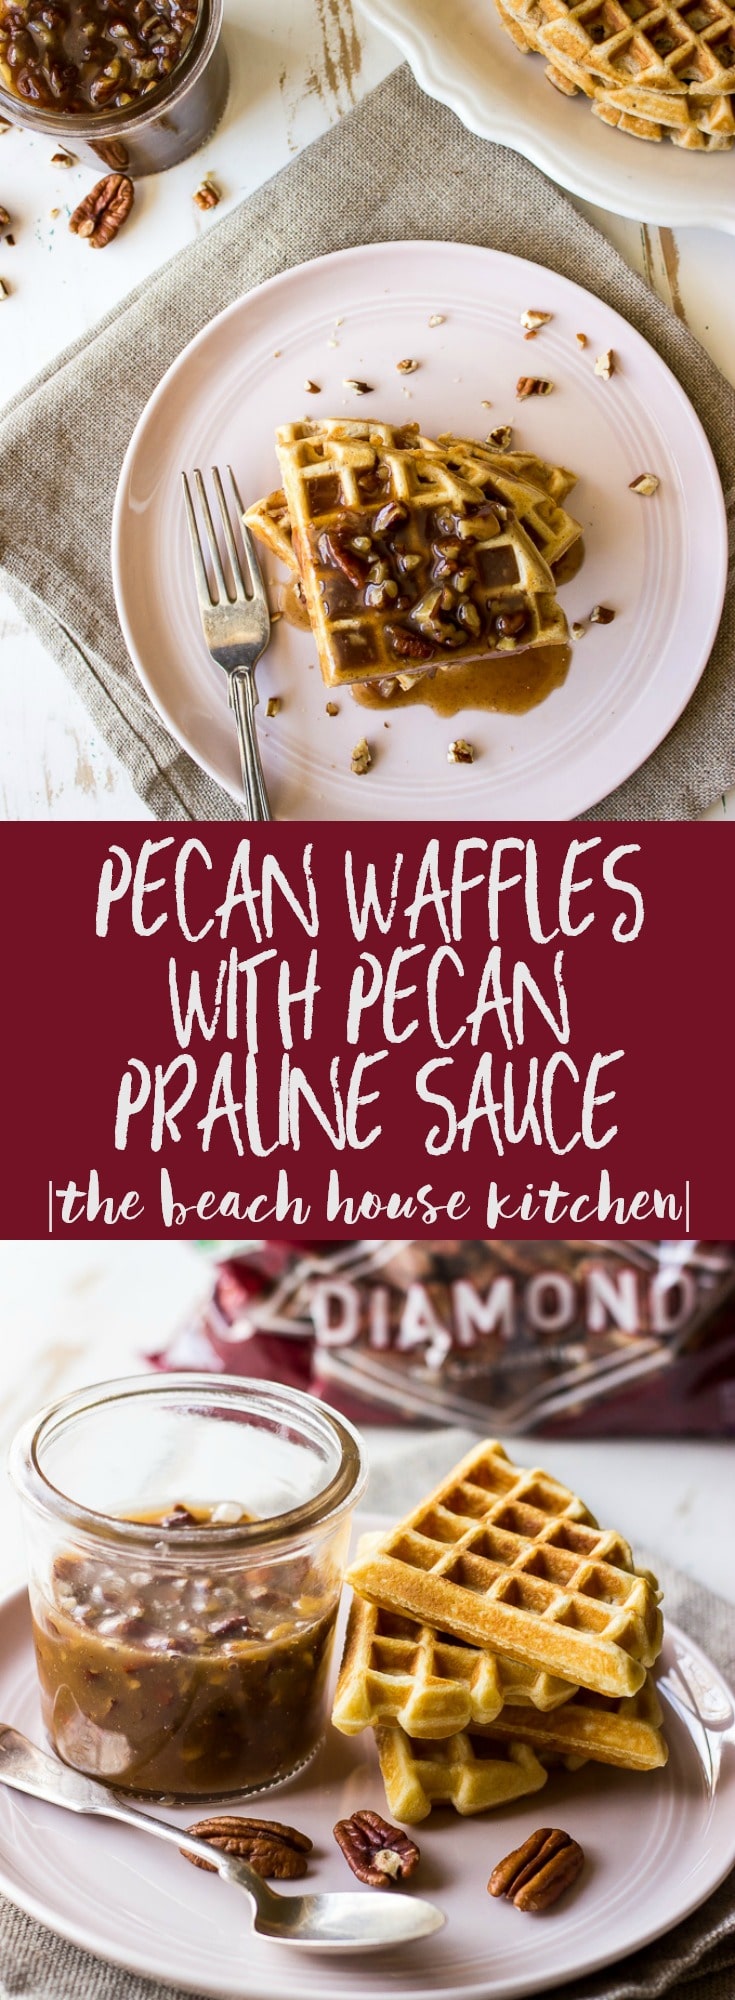 Easy Pecan Waffles with Pecan Praline Sauce | The Beach House Kitchen